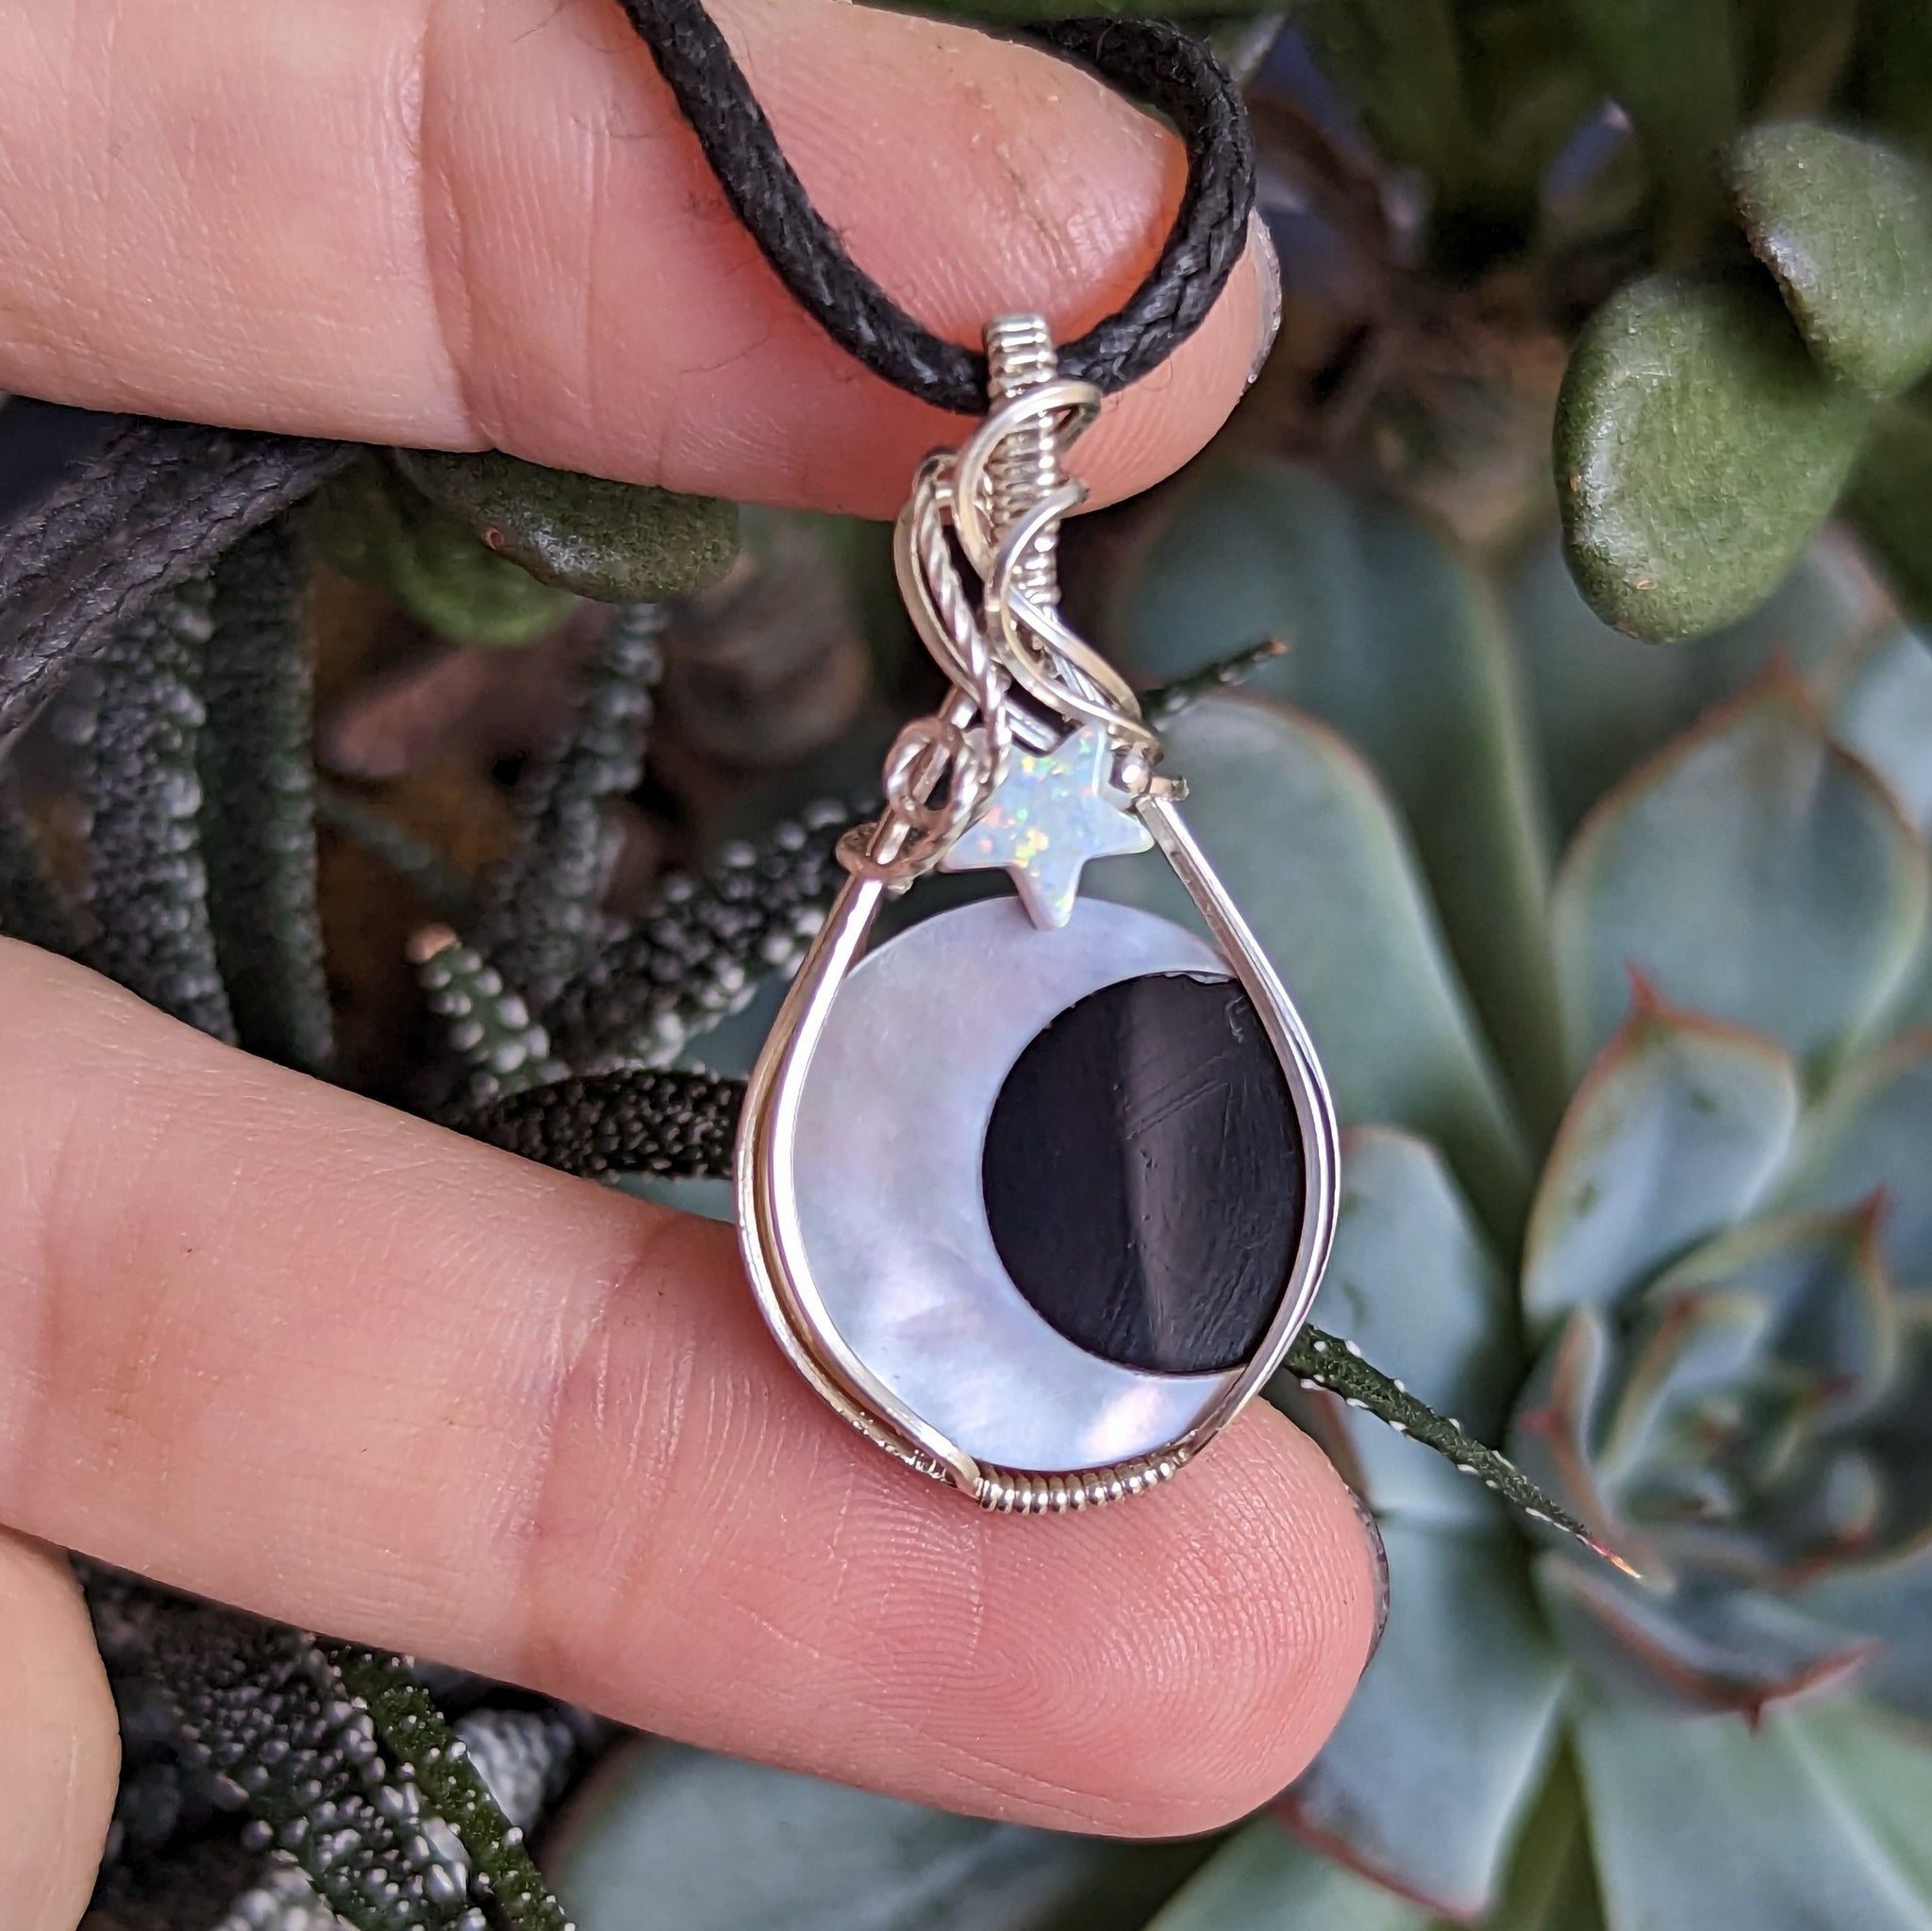 Crescent Moon & Star Wire Wrapped Pendant in Sterling Silver